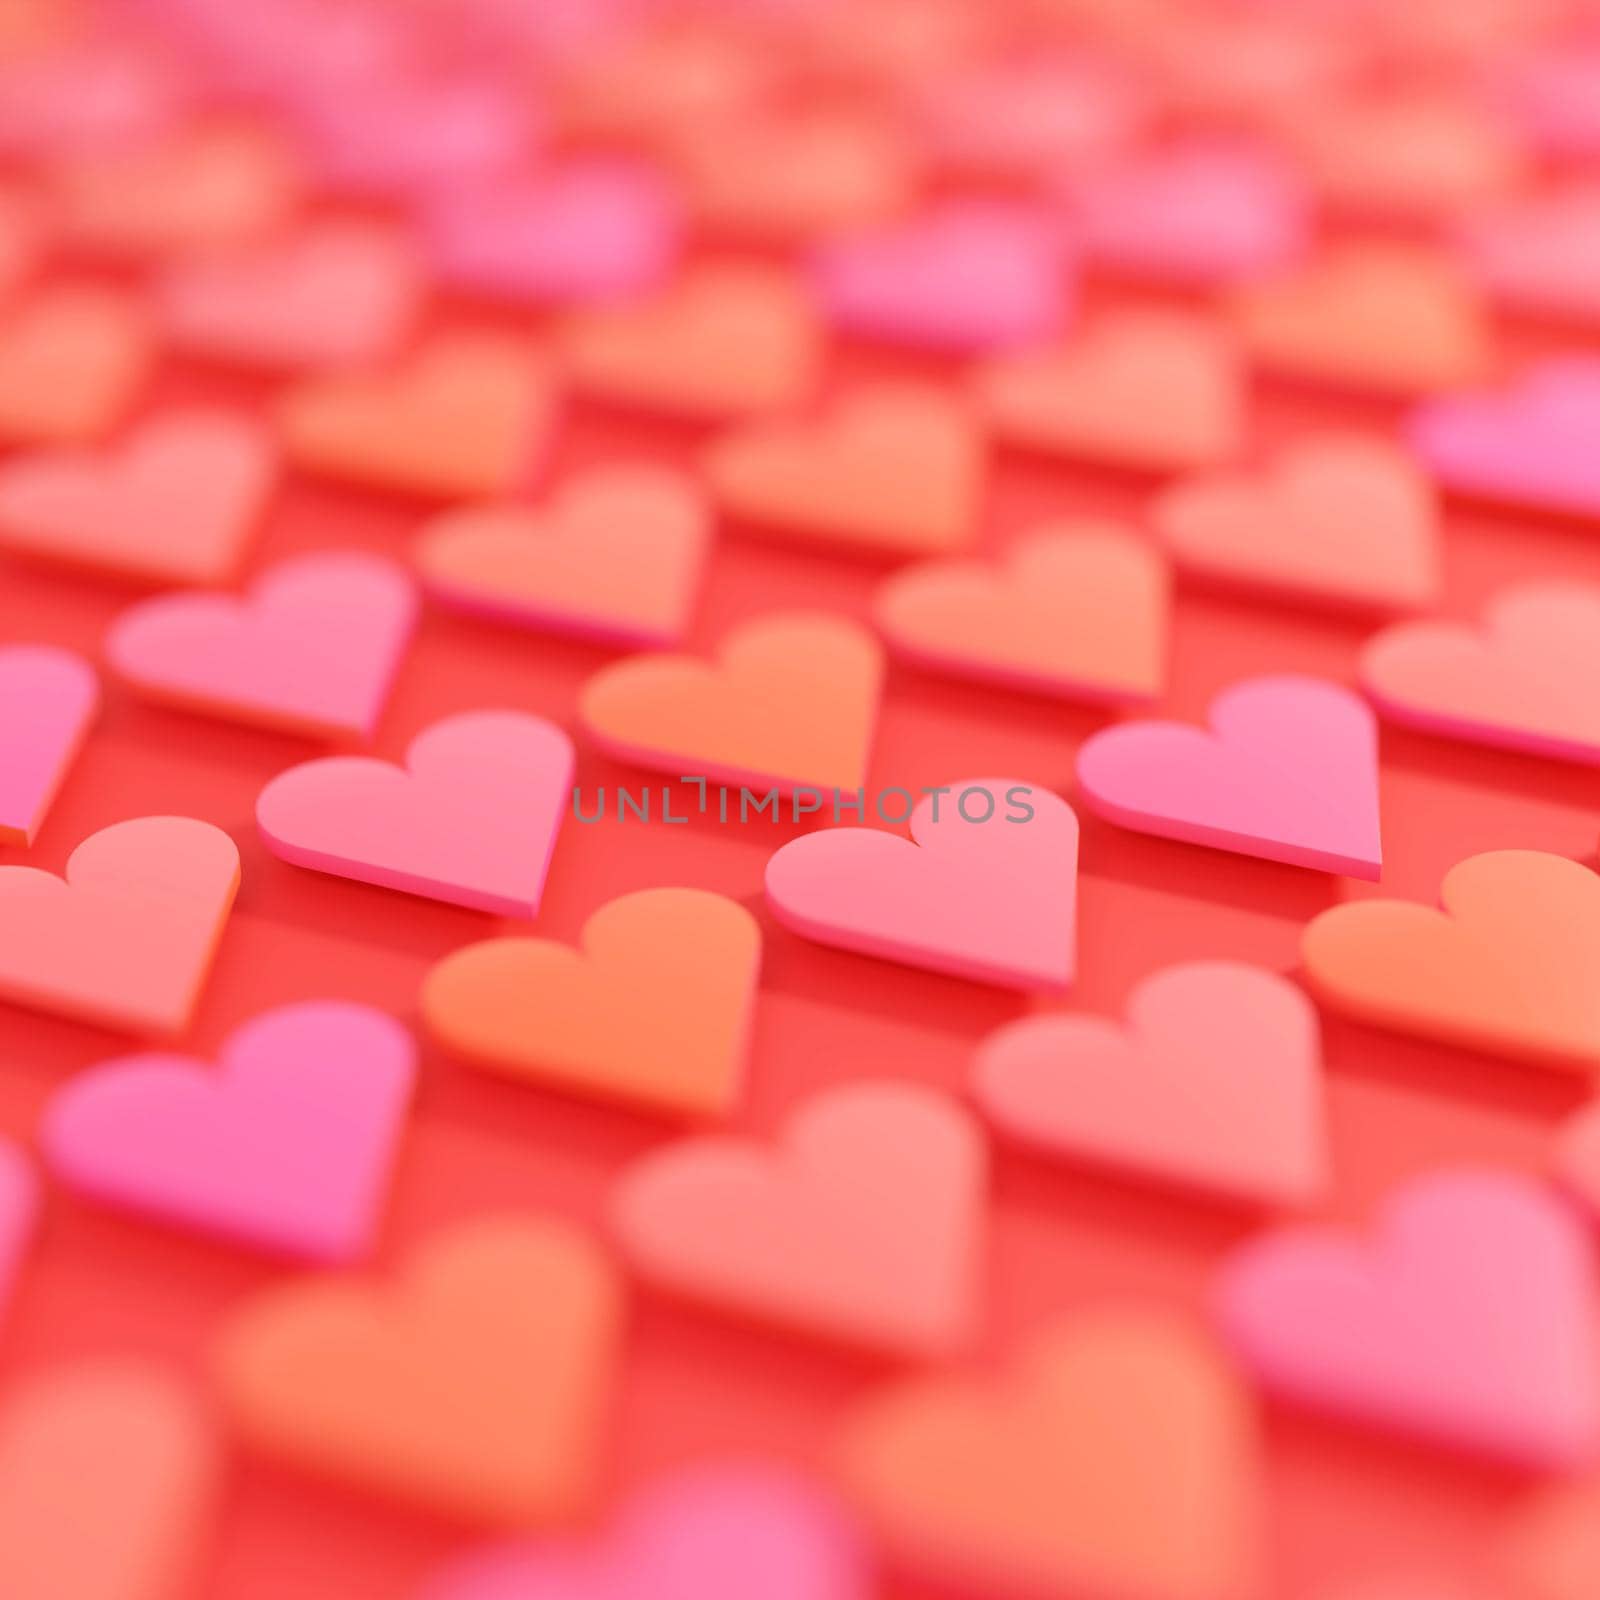 Red and pink hearts in a repeating pattern on red  background with subtle shadows. Digital render. by hernan_hyper